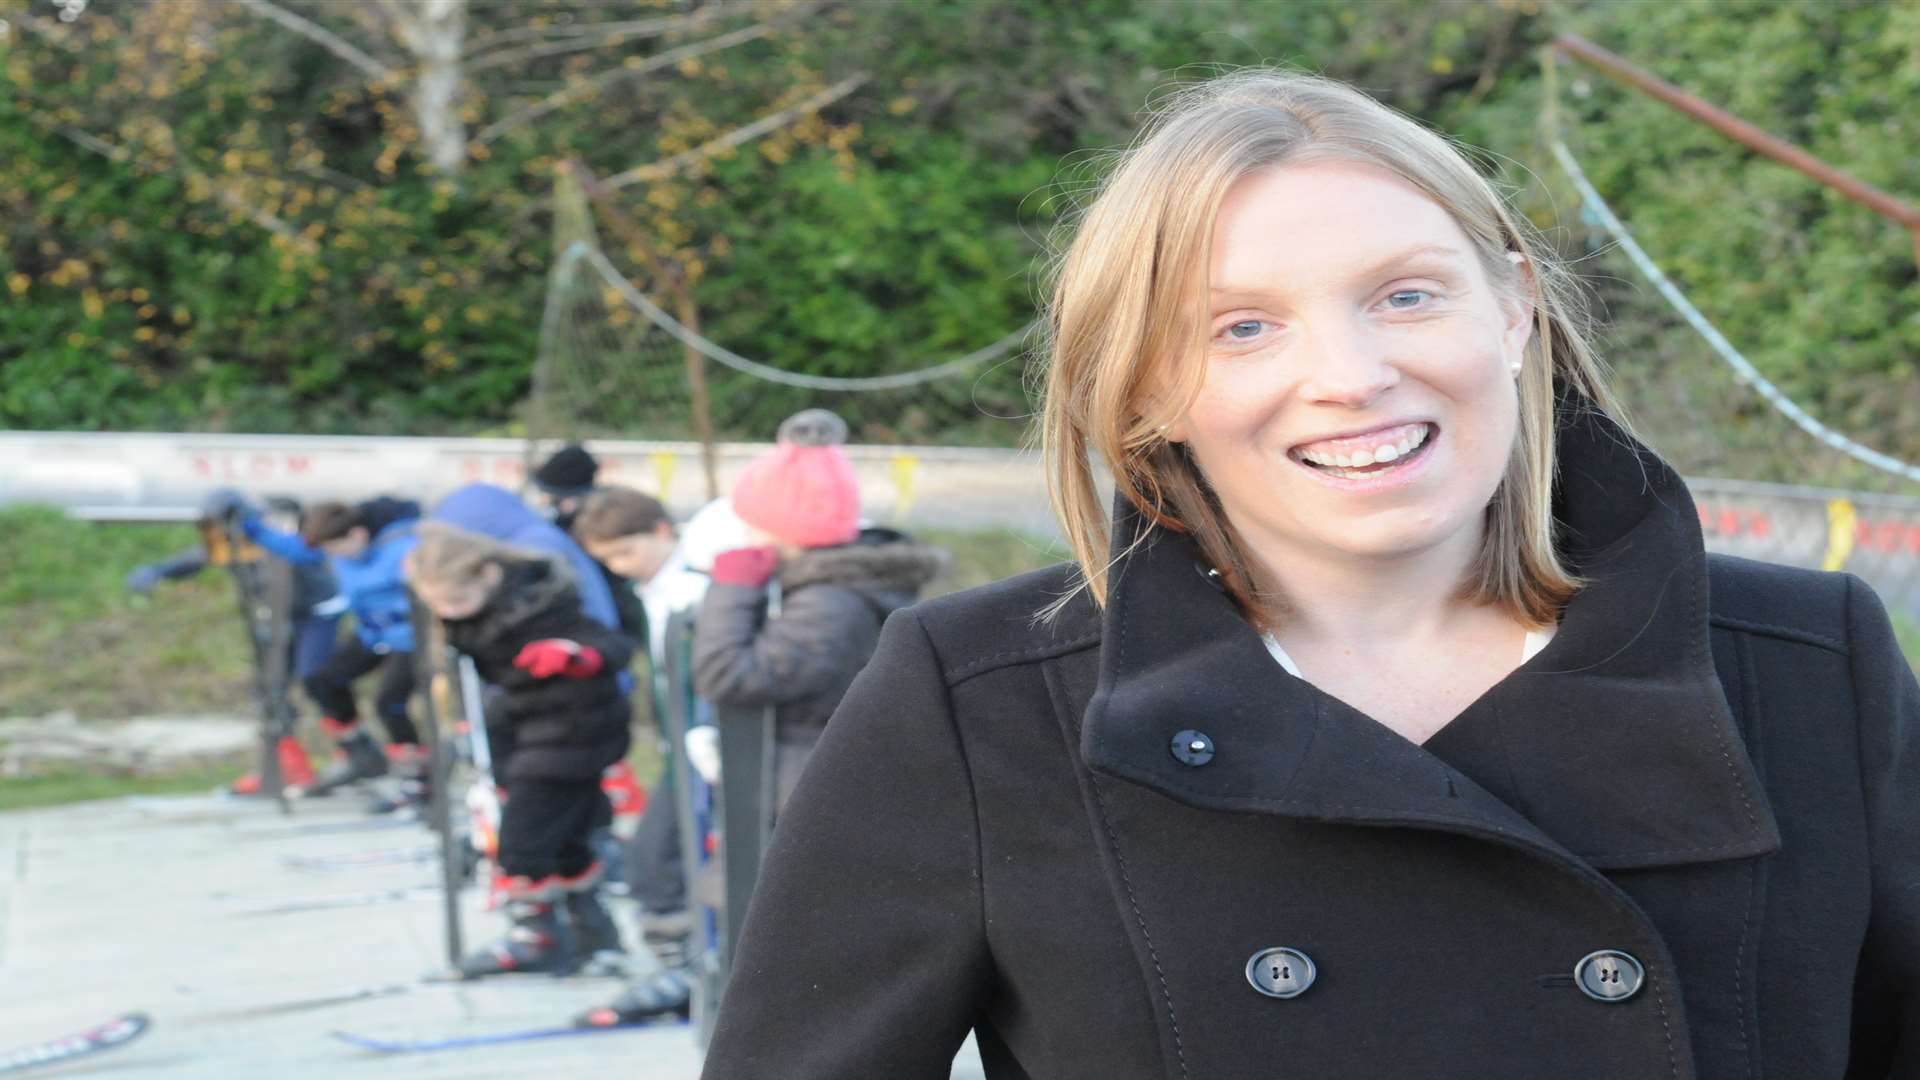 Sports Minister Tracey Crouch at Chatham Ski and Snowboard Centre.